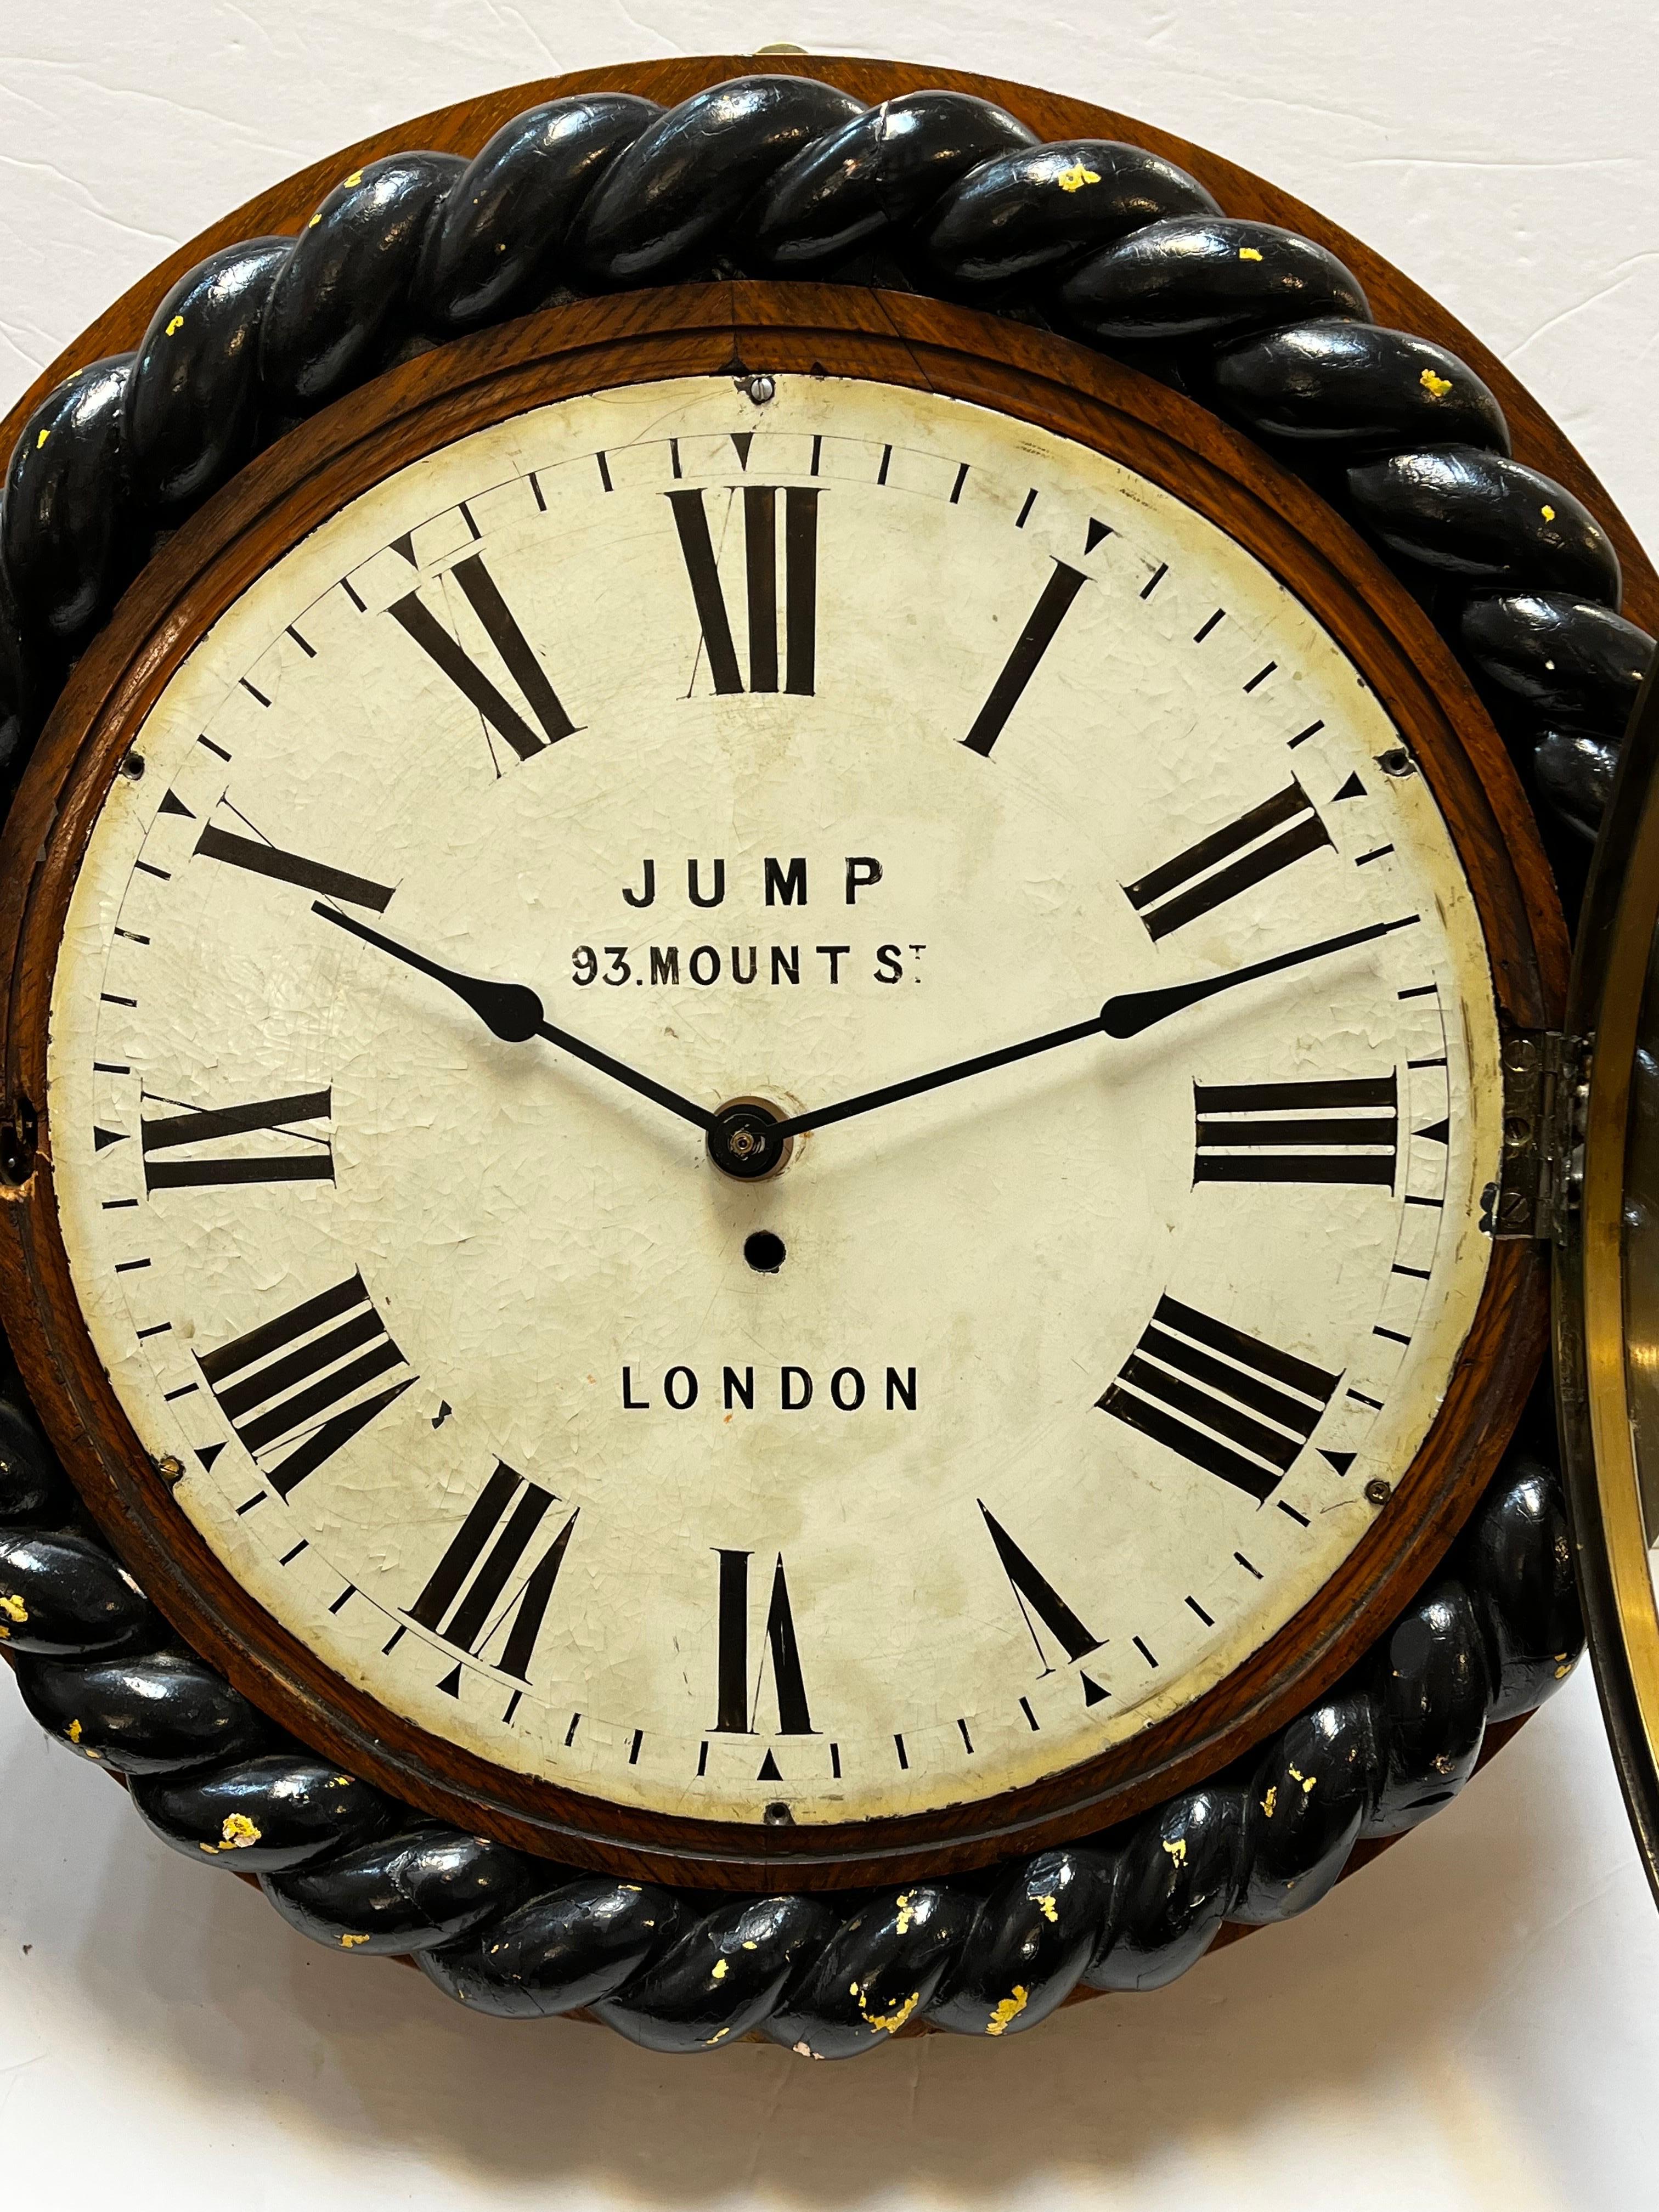 Victorian Antique 19th Century Jump Enamel Clock Face and Barley Twist Housing from London